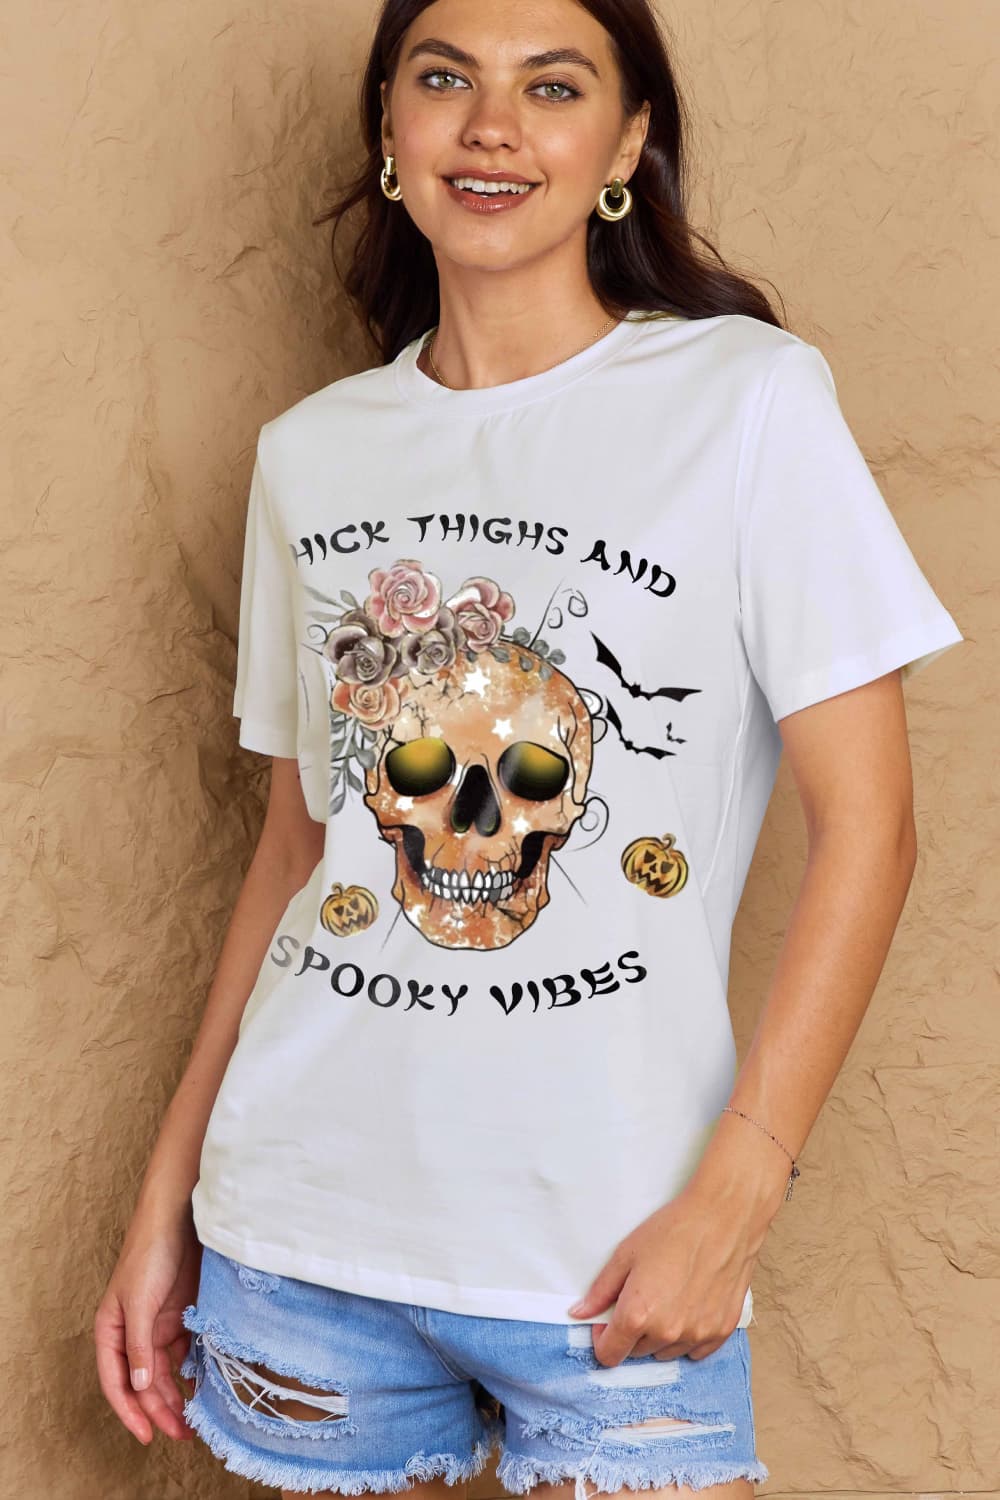 Full Size THICK THIGHS AND SPOOKY VIBES Graphic Cotton T-Shirt - T-Shirts - Shirts & Tops - 23 - 2024